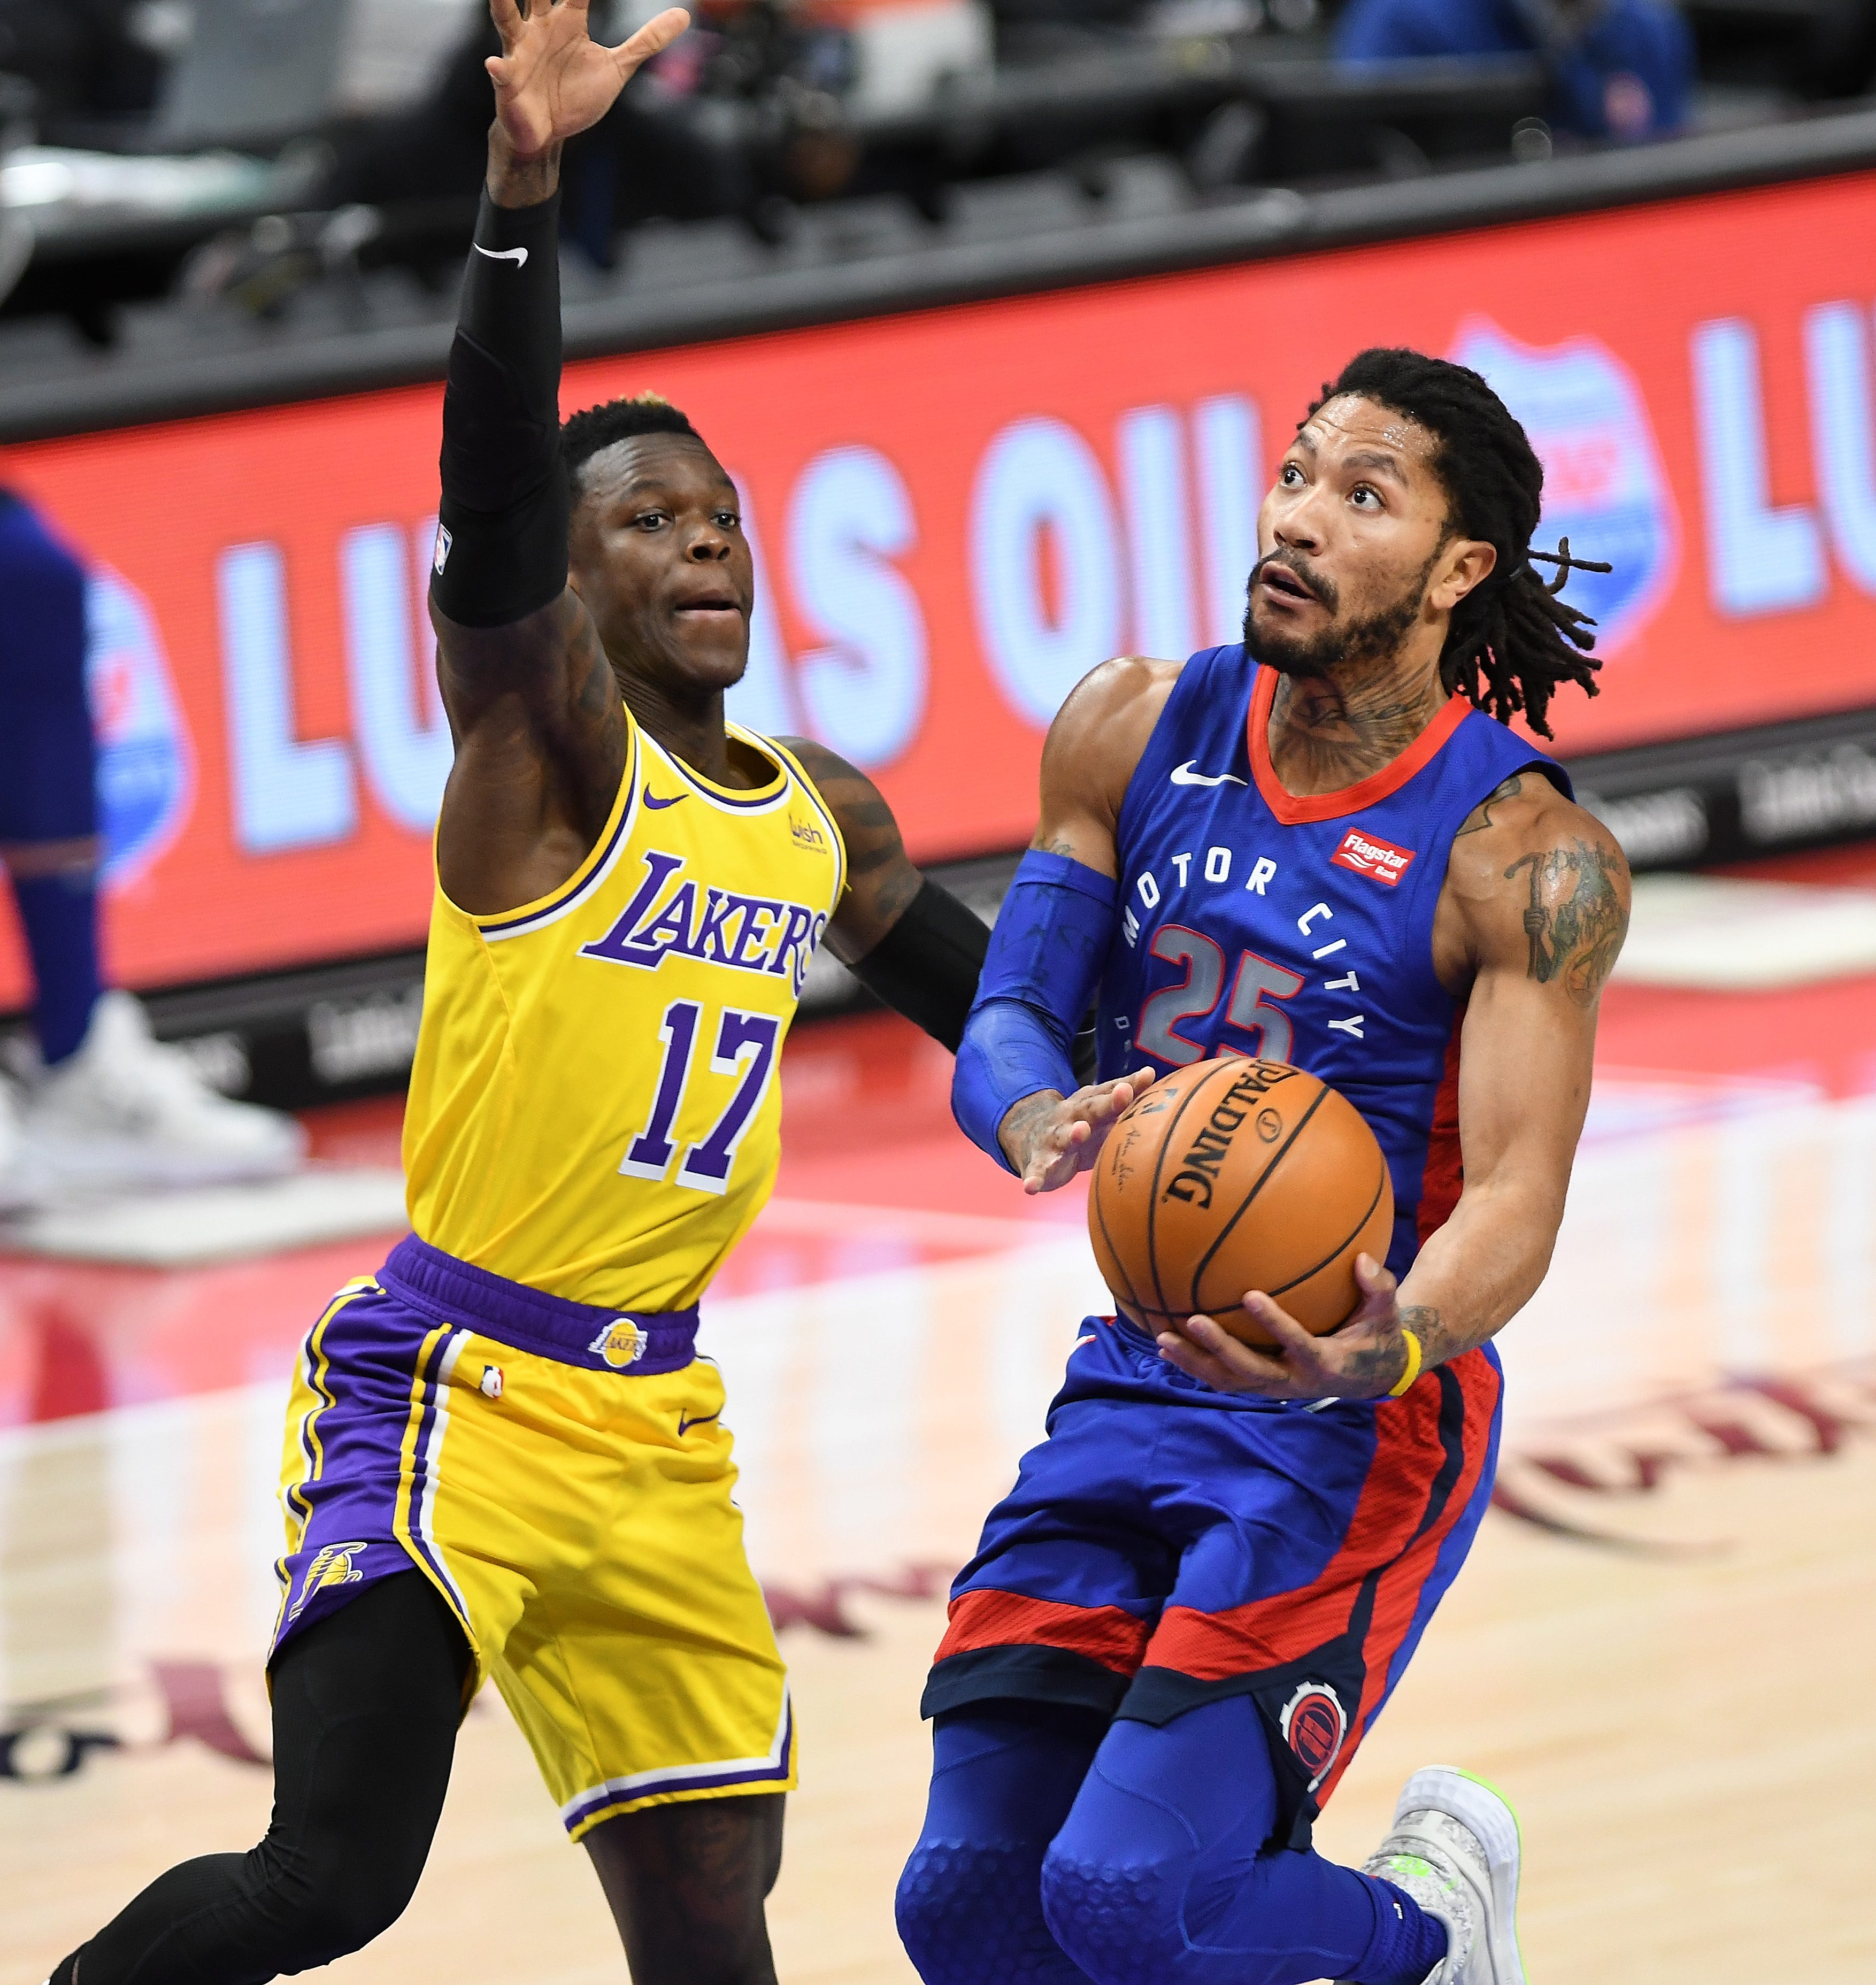 Pistons' Derrick Rose scores over Lakers' Dennis Schroder in the second quarter.